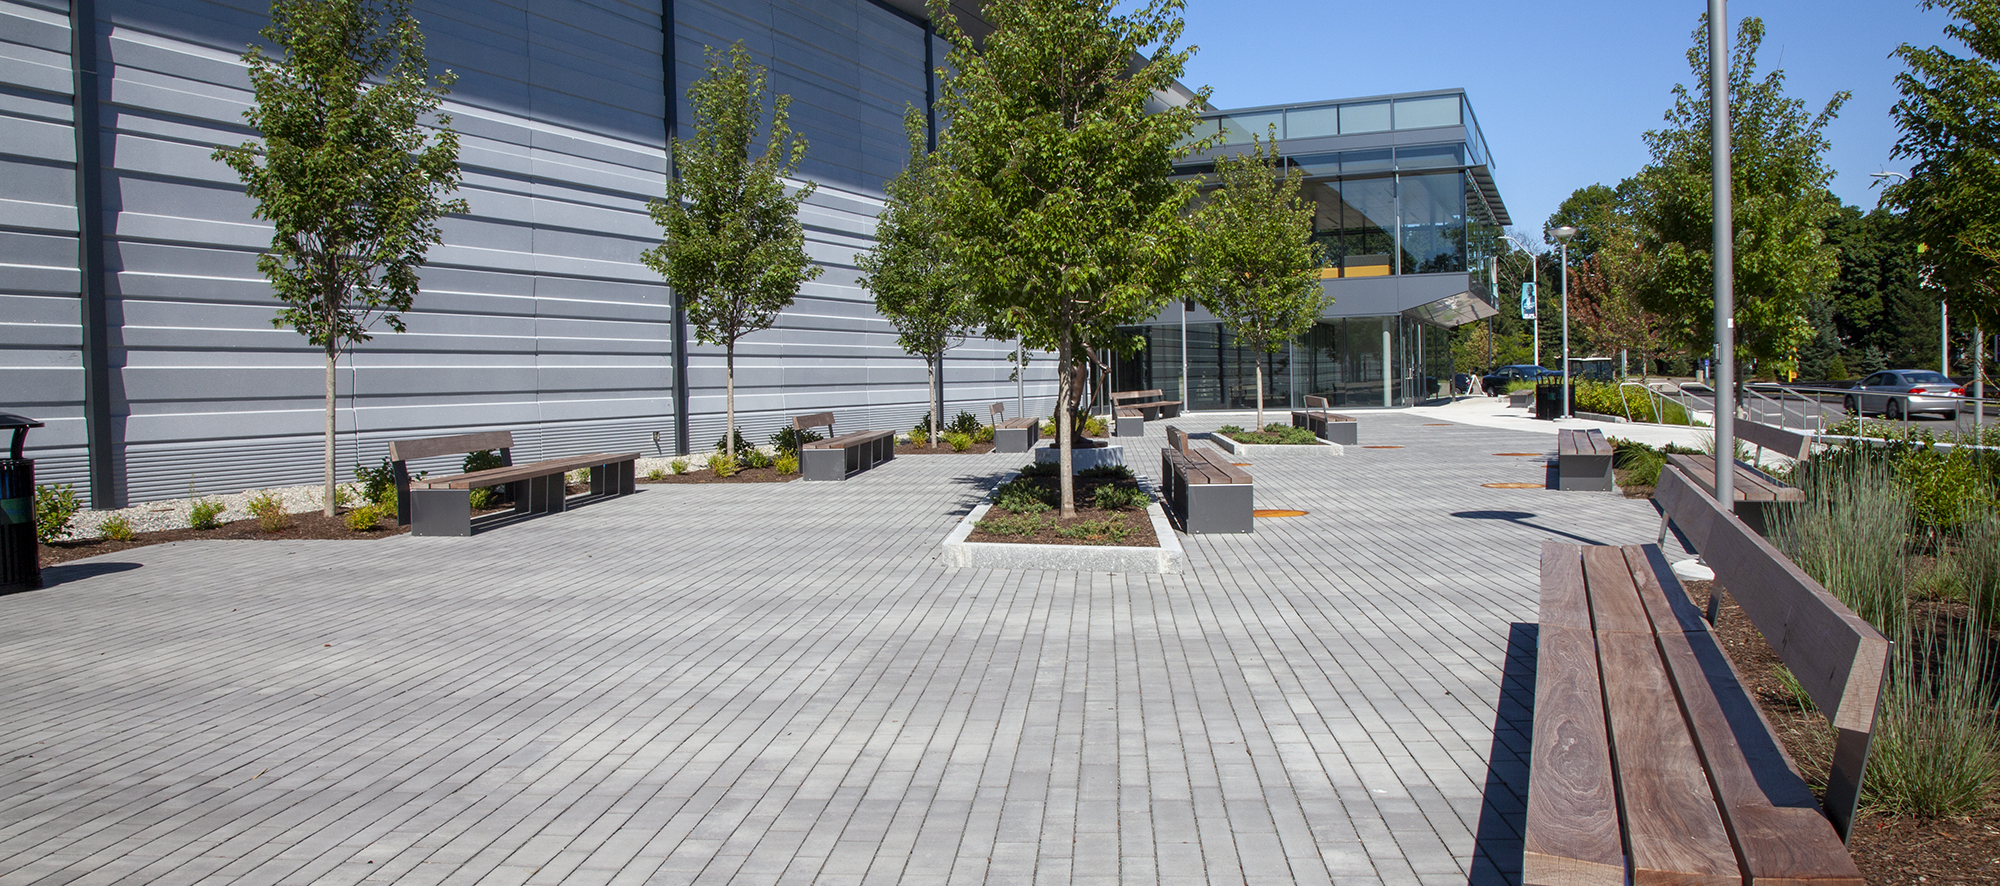 Landscaping and benches sit on grey Eco-Line permeable pavers at the entrance of Bentley University Stadium, with stairs to the parking lot.